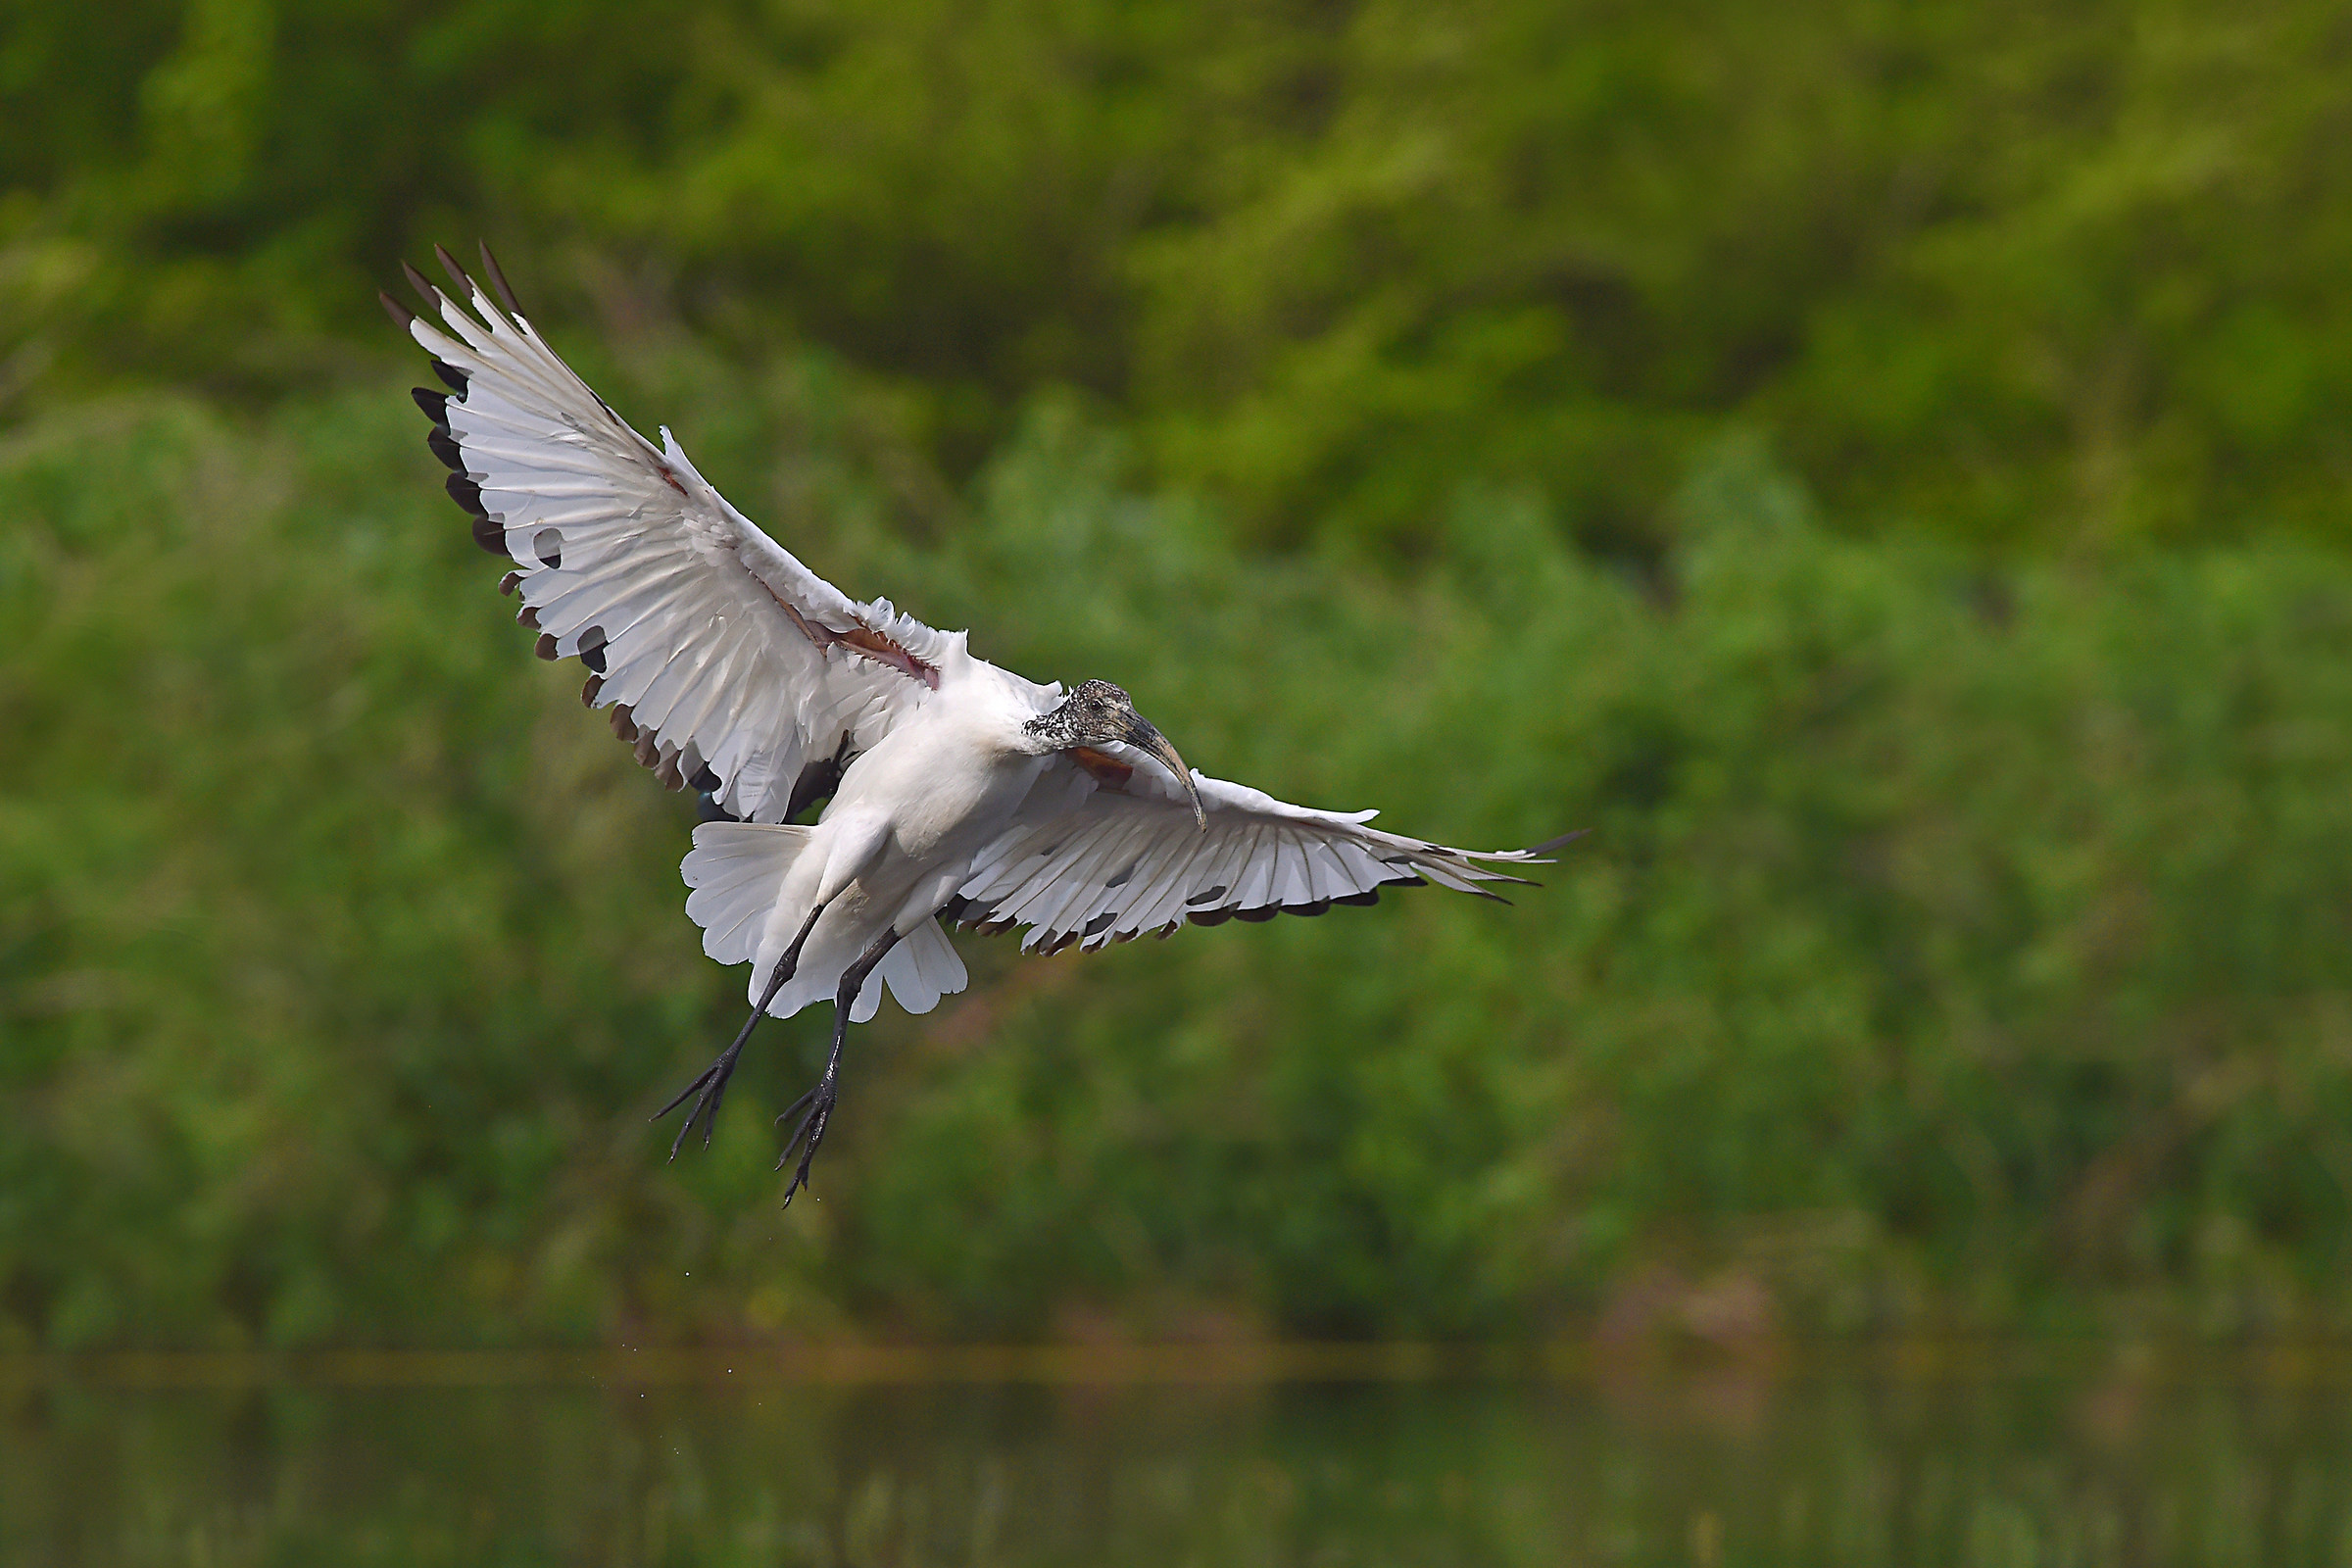 Stories of feathers 5 (Sacred Ibis)...